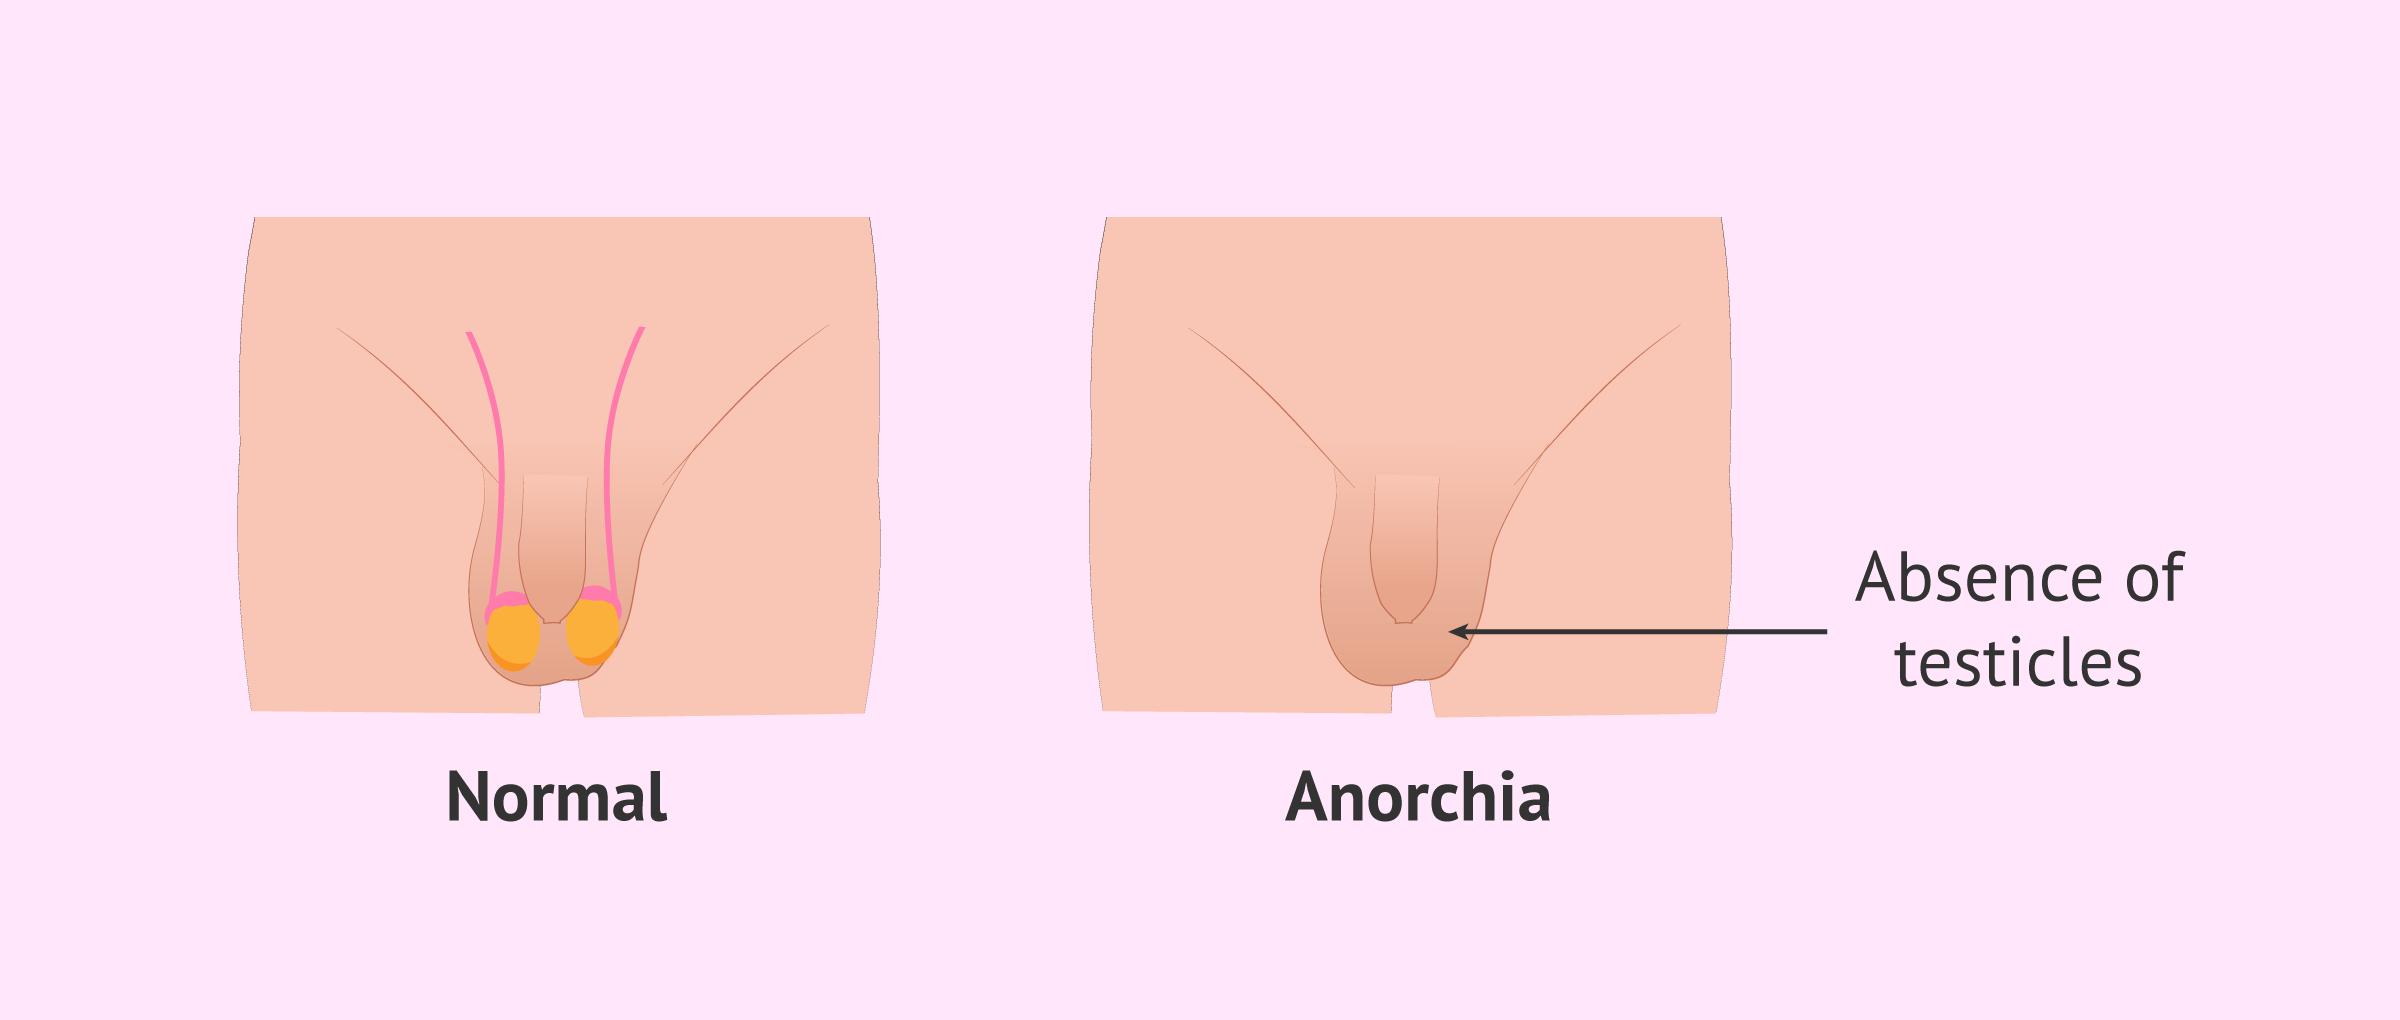 Imagen: anorchia-absence-testicles